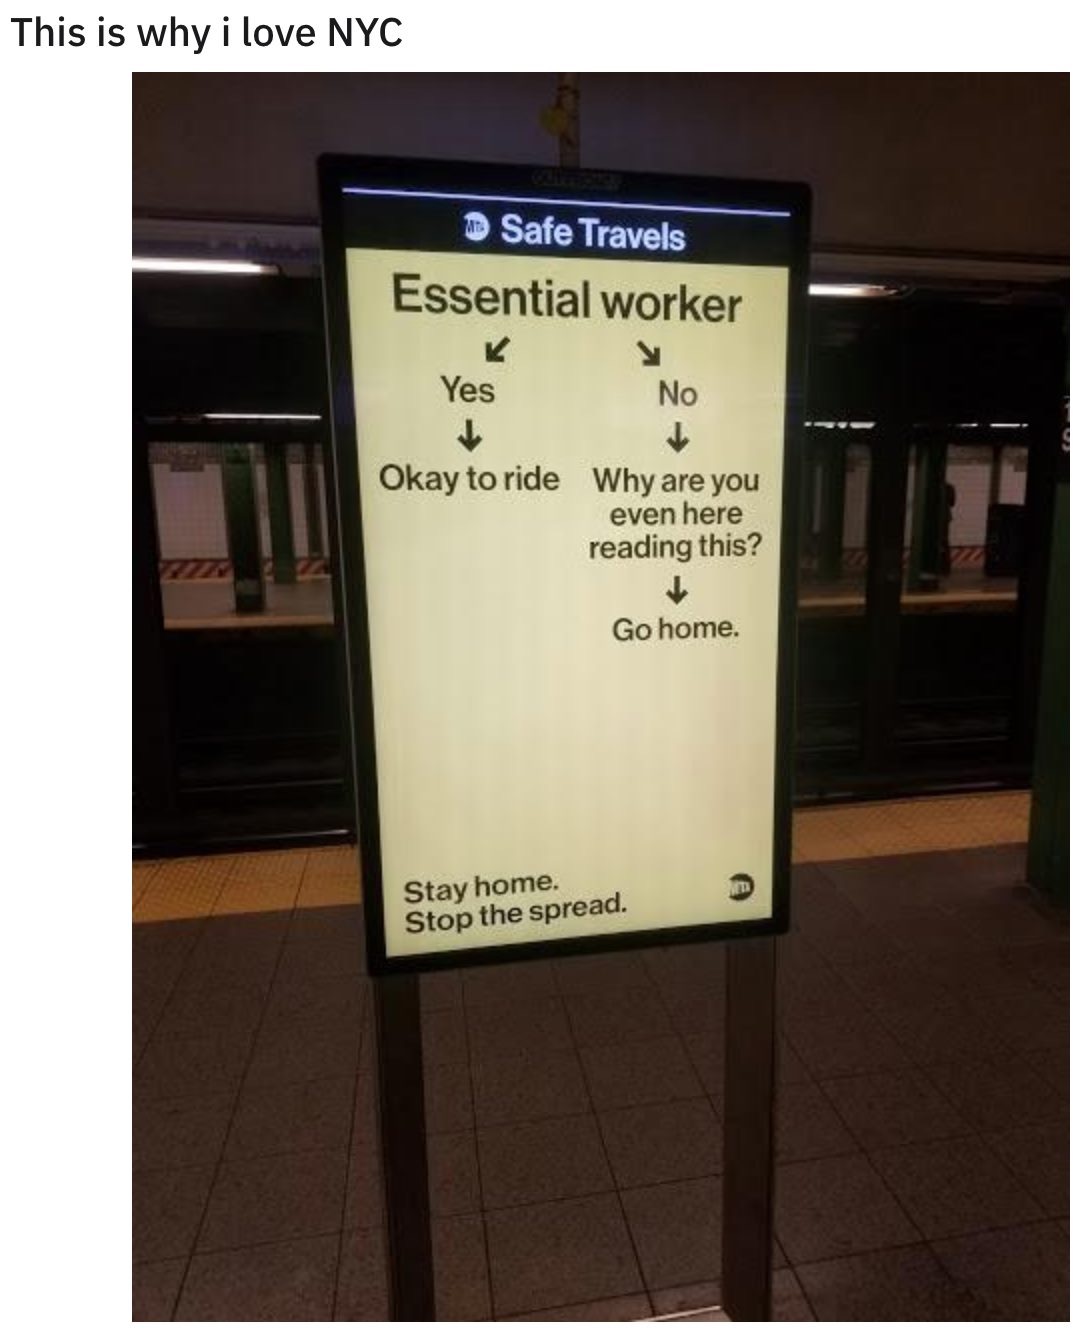 signage - This is why i love Nyc D Safe Travels Essential worker Yes No Okay to ride Why are you even here reading this? Go home. Stay home. Stop the spread.